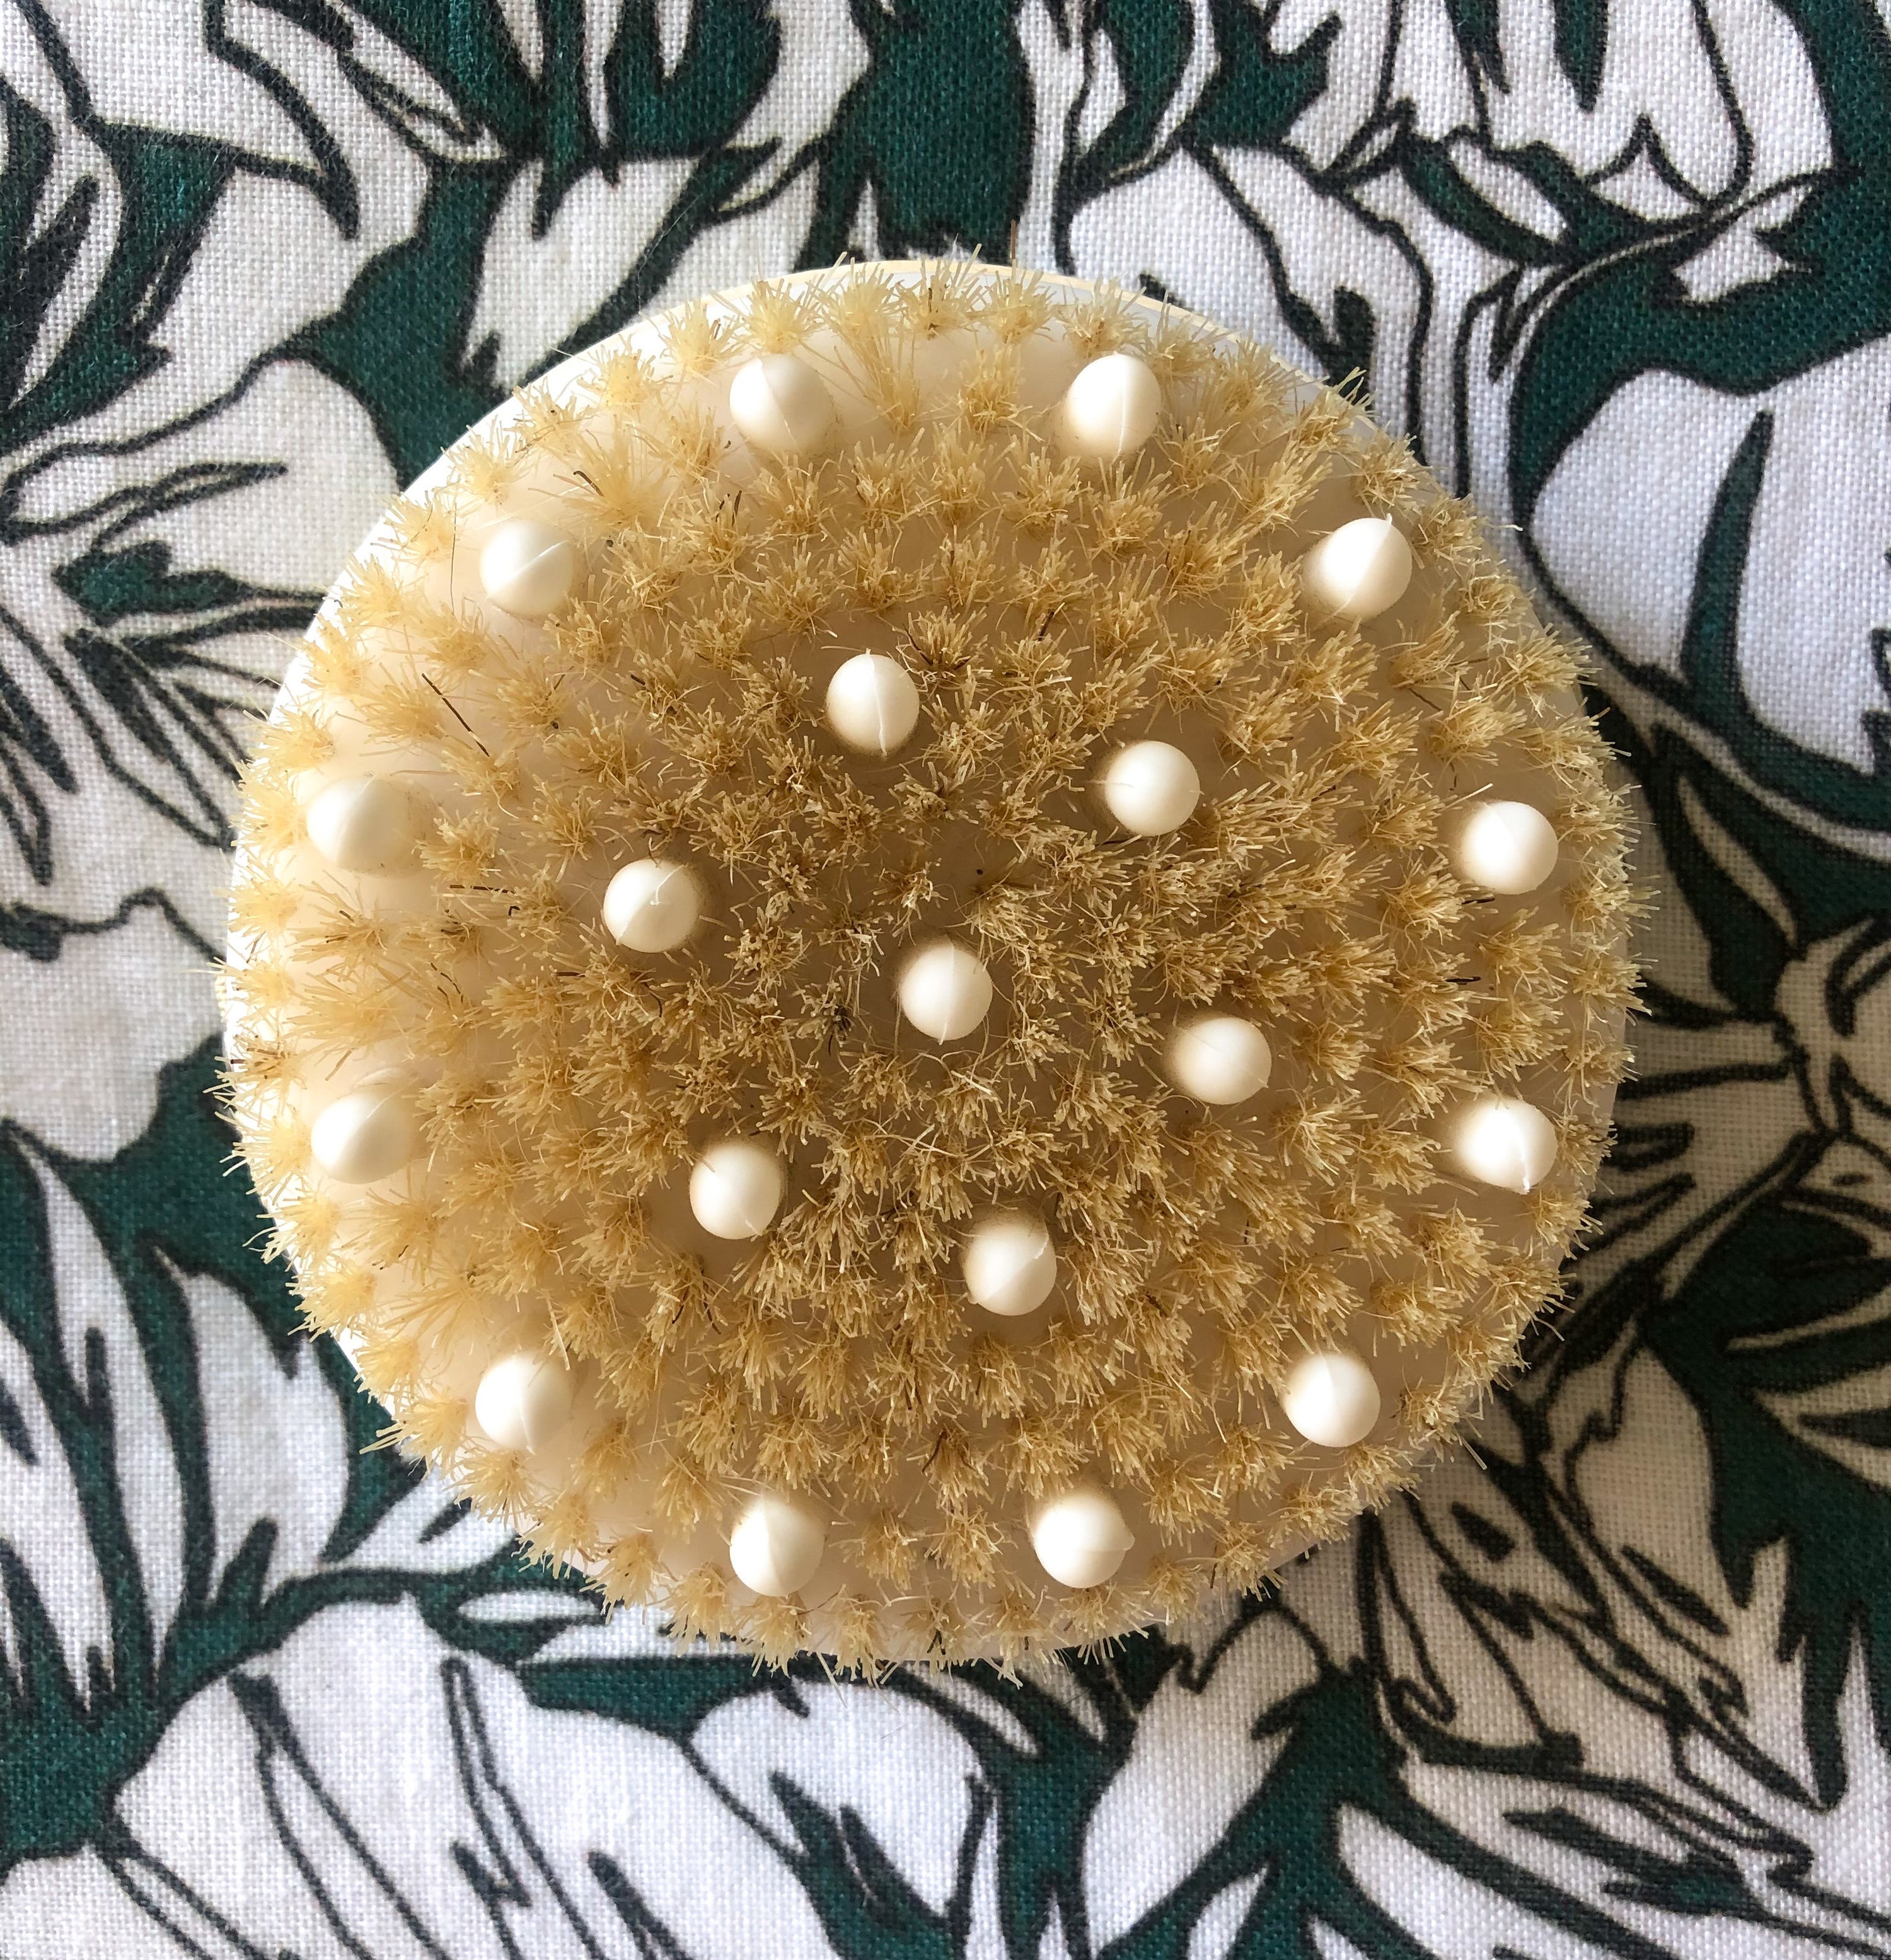 A flatlay of the body rush with rubber nodes on a patterned fabric